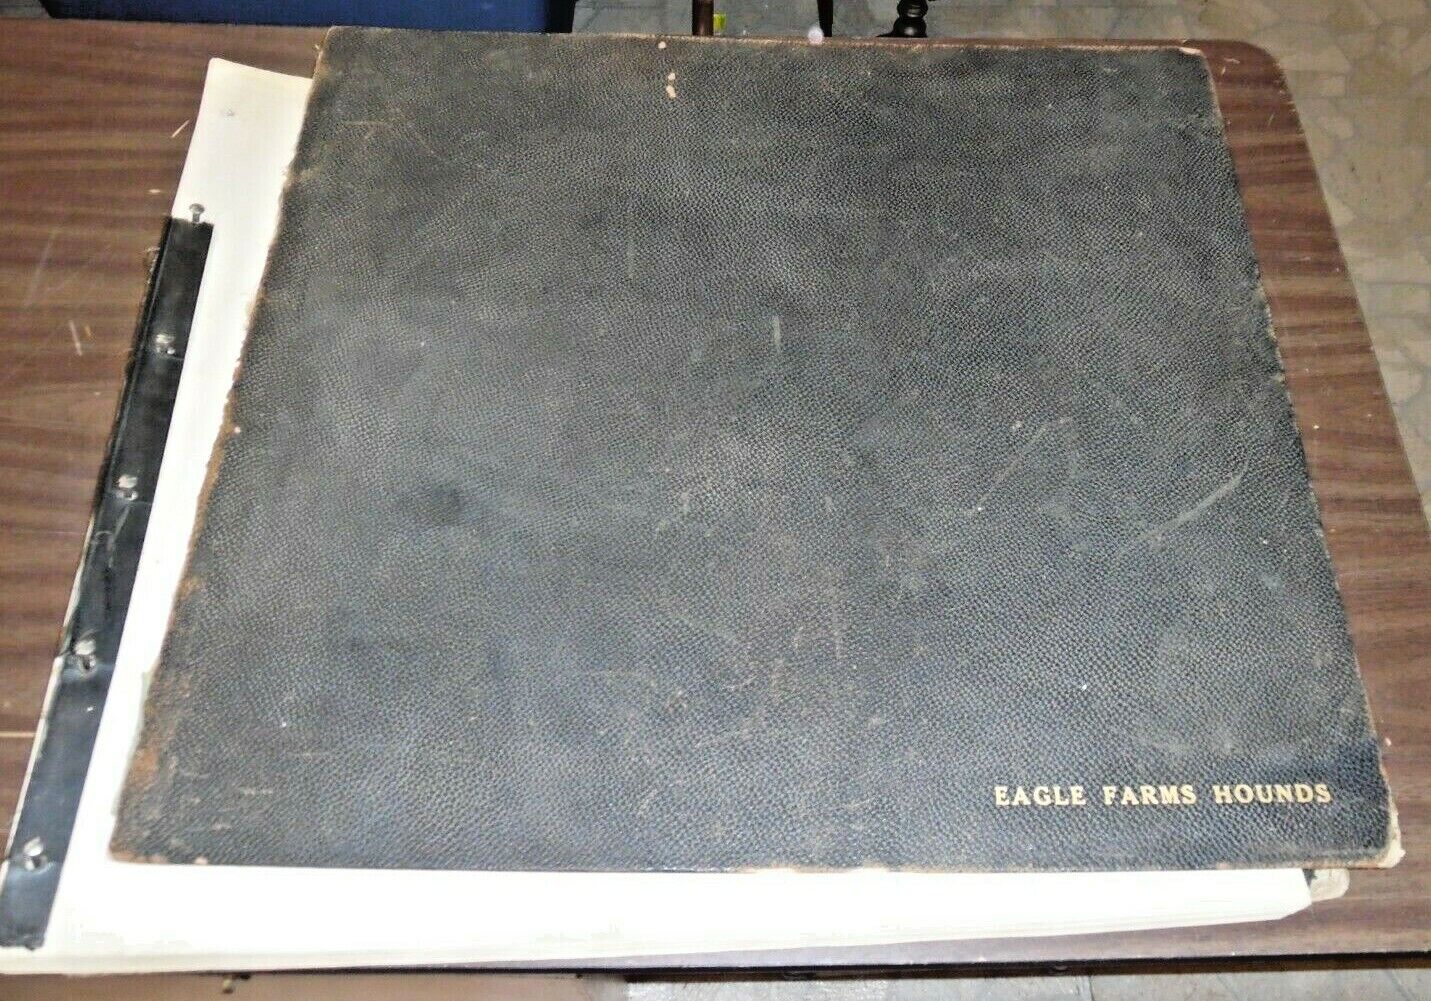 LARGE 1930s Dog Breeding Record Journal Eagle Farms Hounds Chester Springs PA